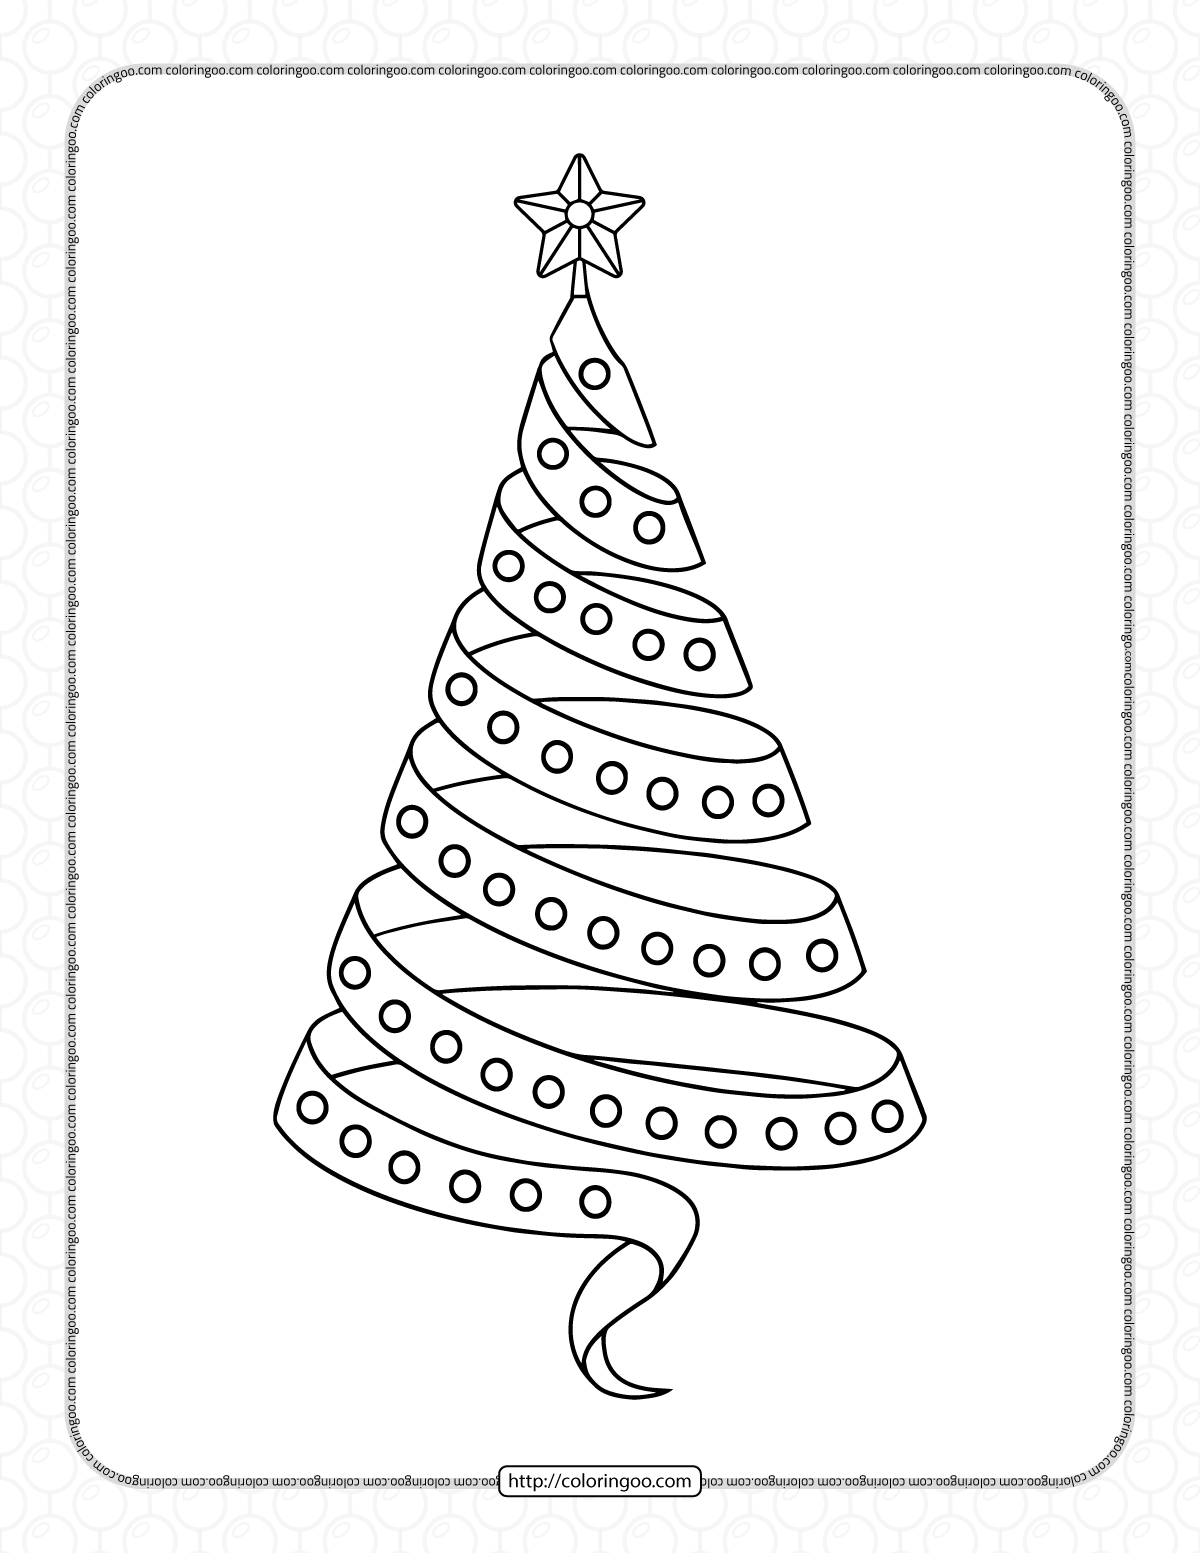 ribbon christmas tree coloring pages